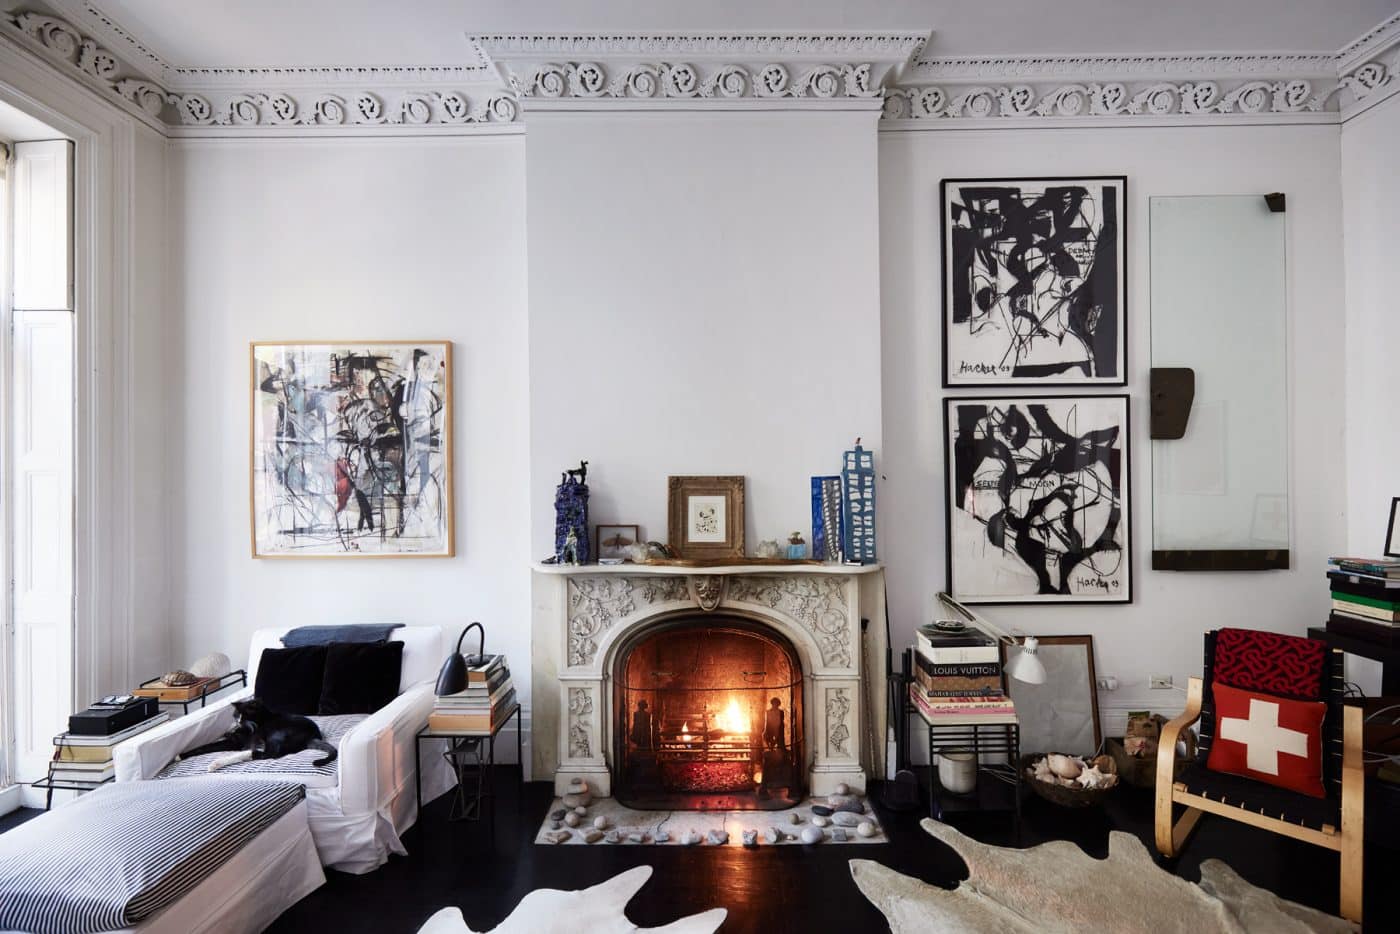 Tonne Goodman's living room with a working fireplace, unique rugs, and eye-catching art